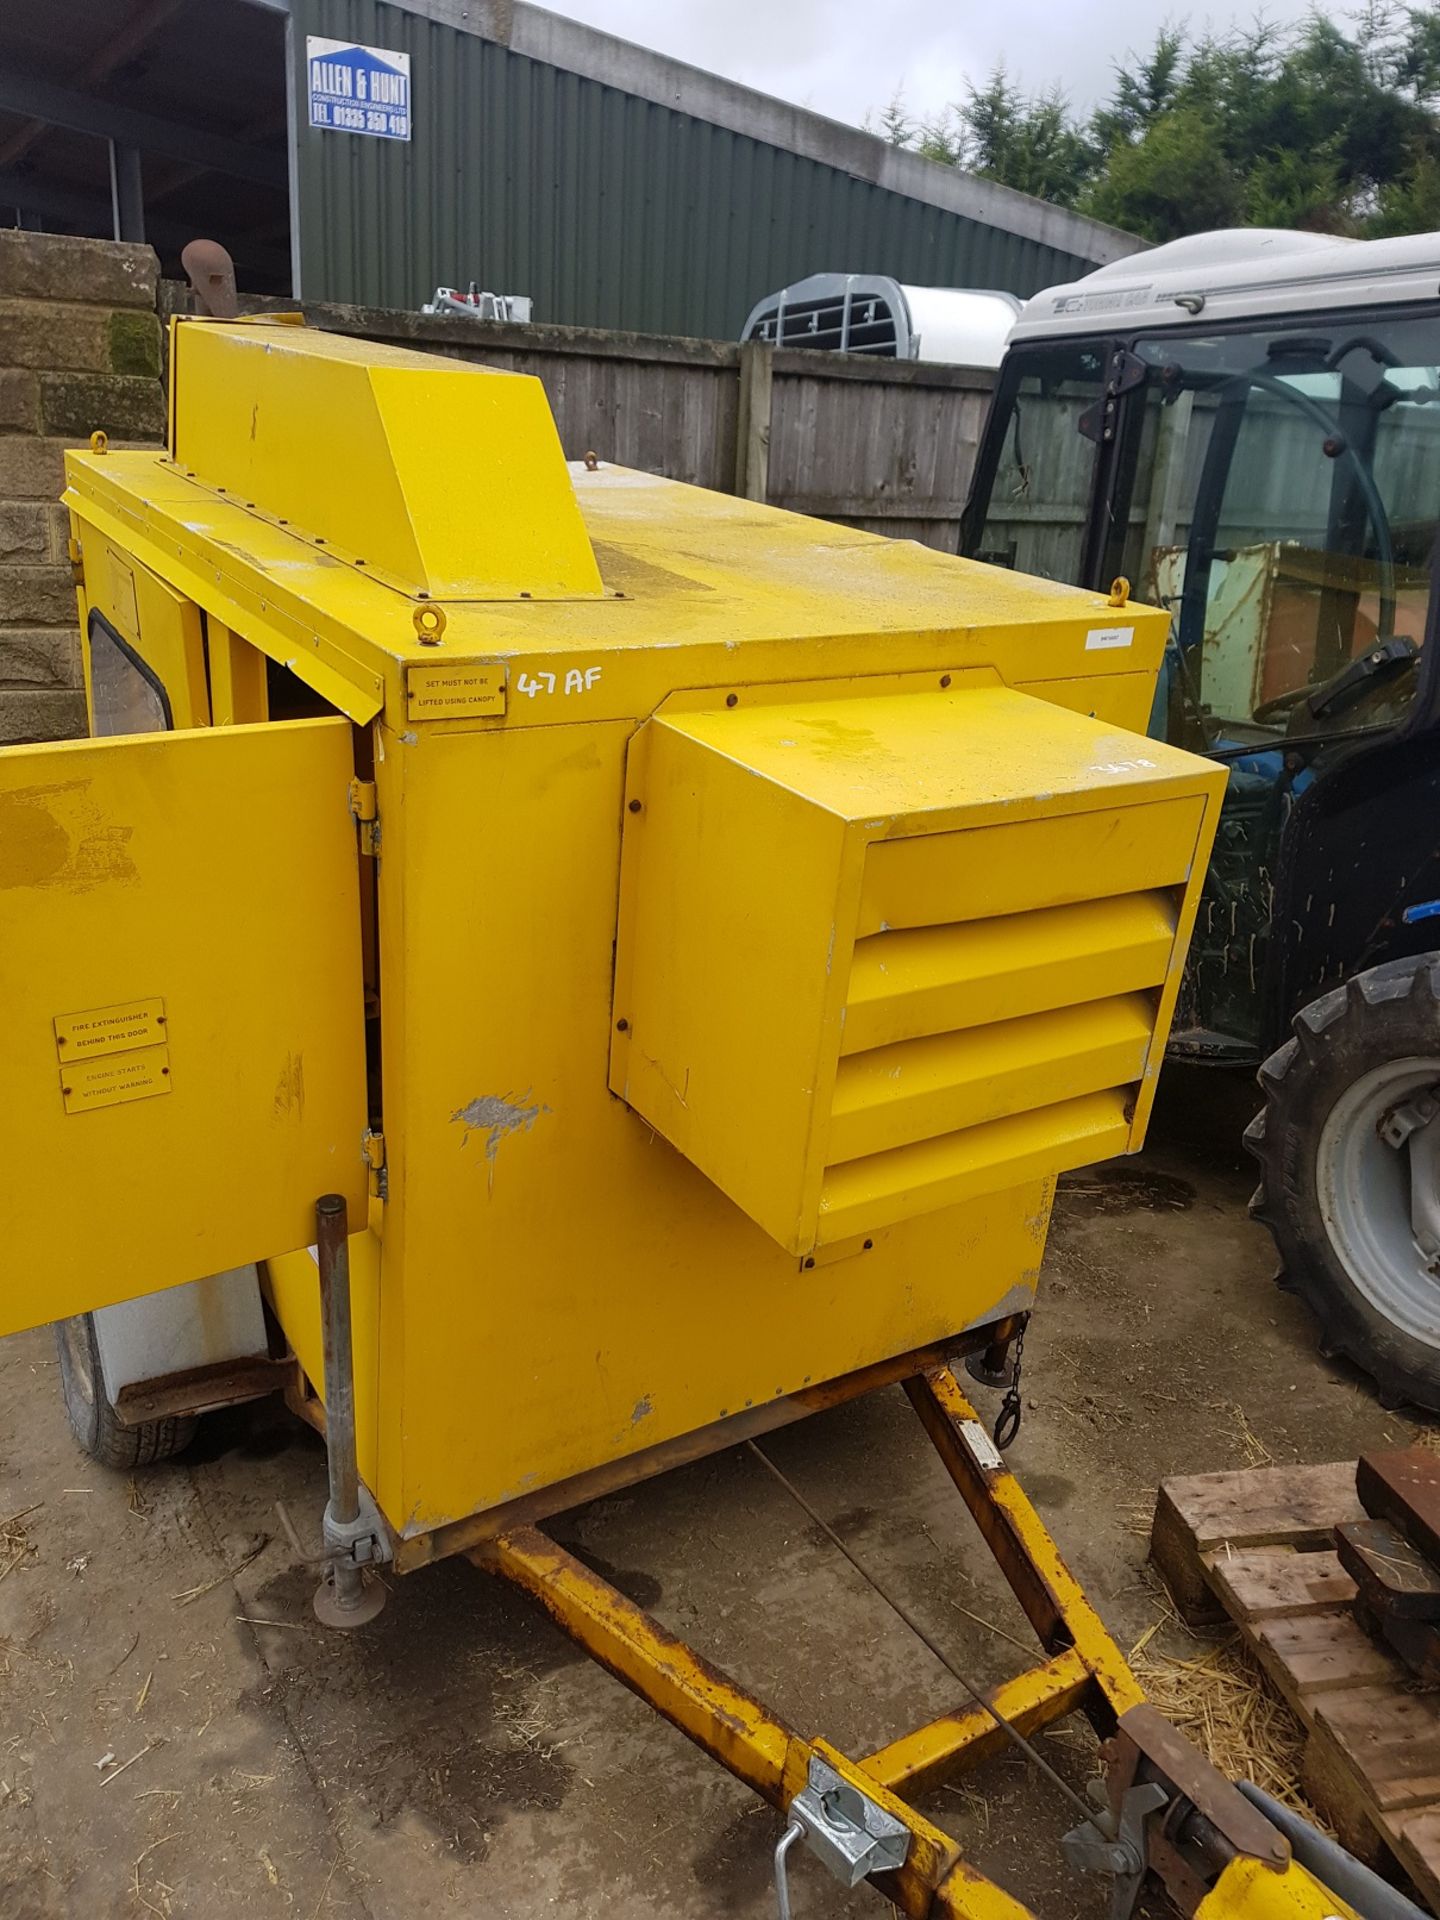 SINGLE AXLE TRAILER WITH YELLOW GENERATOR, SHOWING 52 HOURS *PLUS VAT*